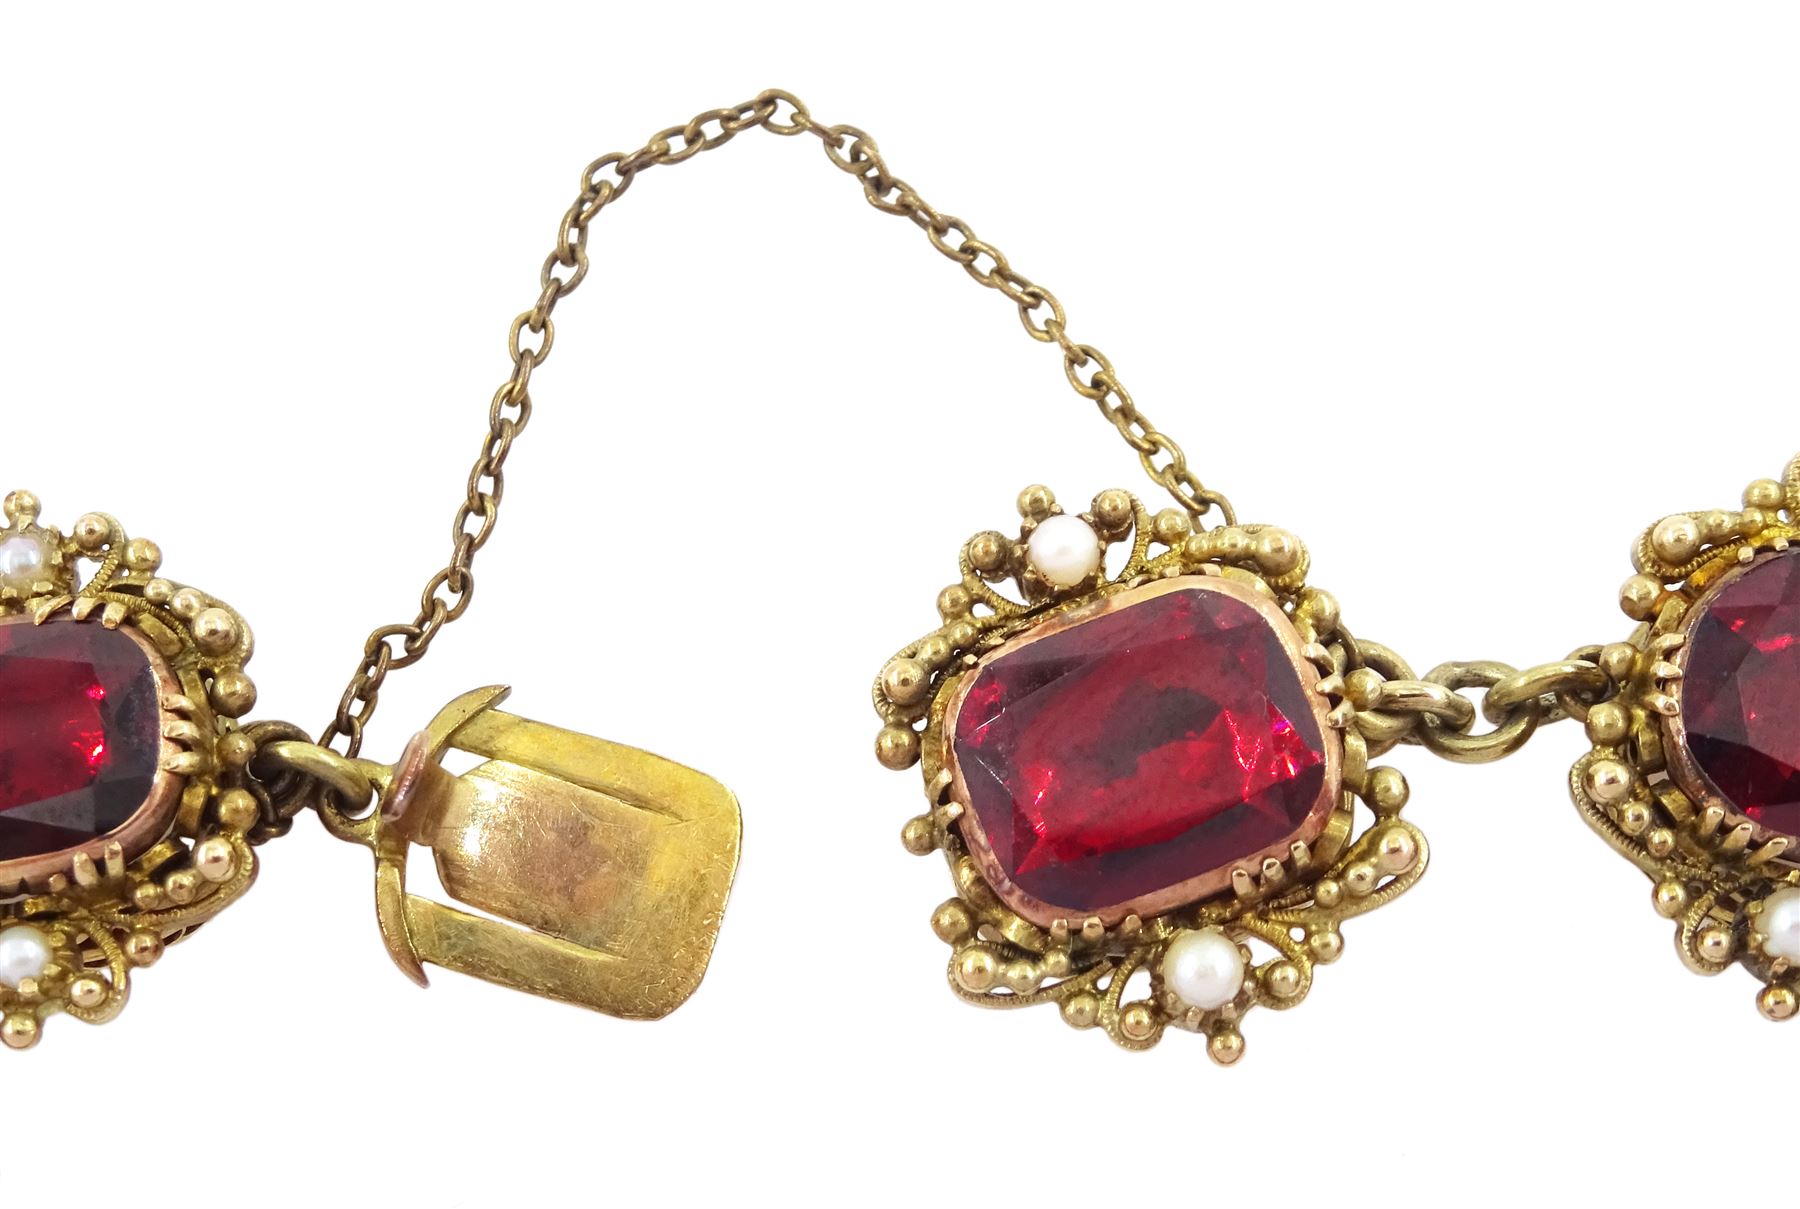 Early 20th century gold garnet and pearl bracelet - Image 2 of 2